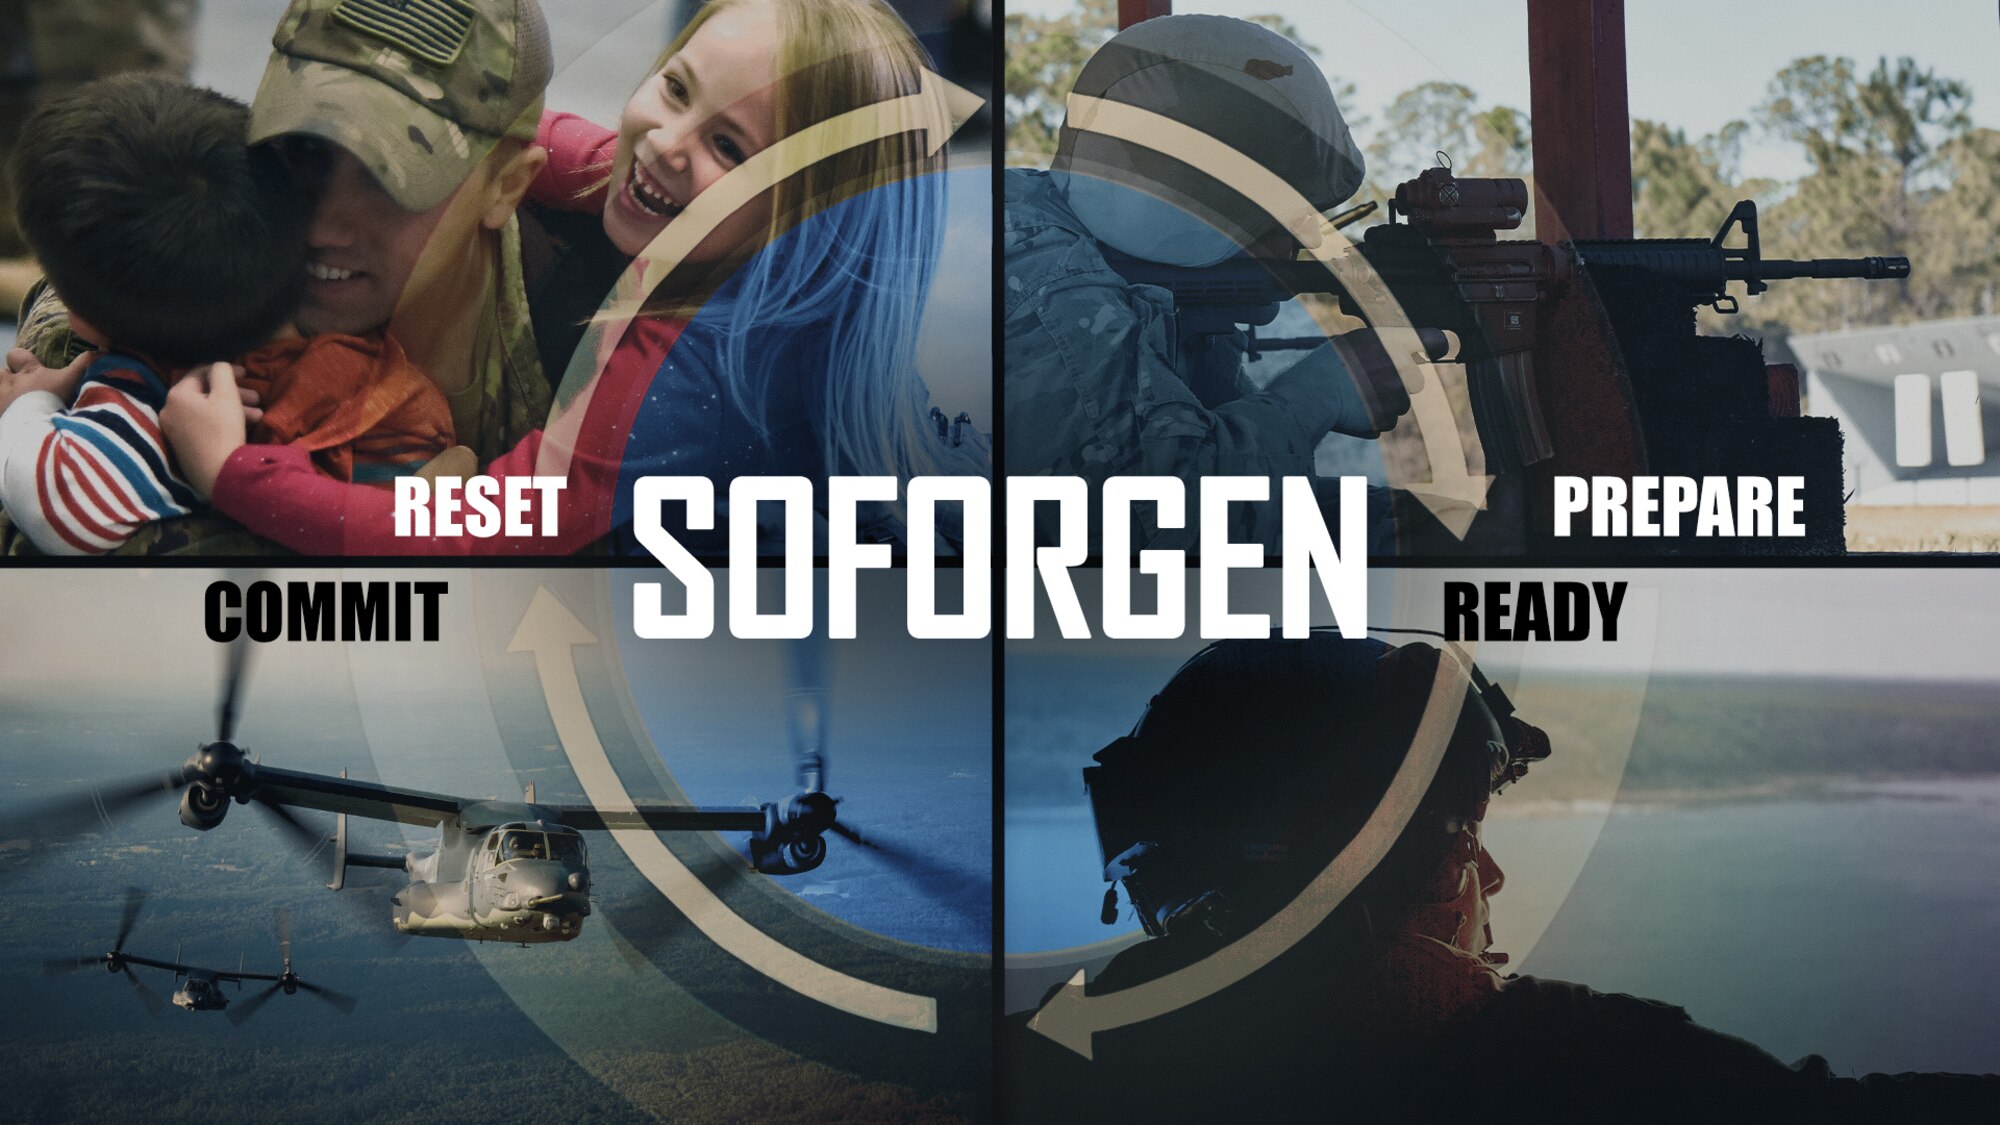 SOFORGEN stands for Special Operations Forces Generation and is divided into four phases. The cycle begins post deployment with the RESET phase where Airmen have the opportunity to focus on resilience and reintegrating into family life. Airmen train together during the PREPARE phase, orient themselves to conduct their mission globally during the READY phase and are certified and primed to deploy when they reach the COMMIT phase.